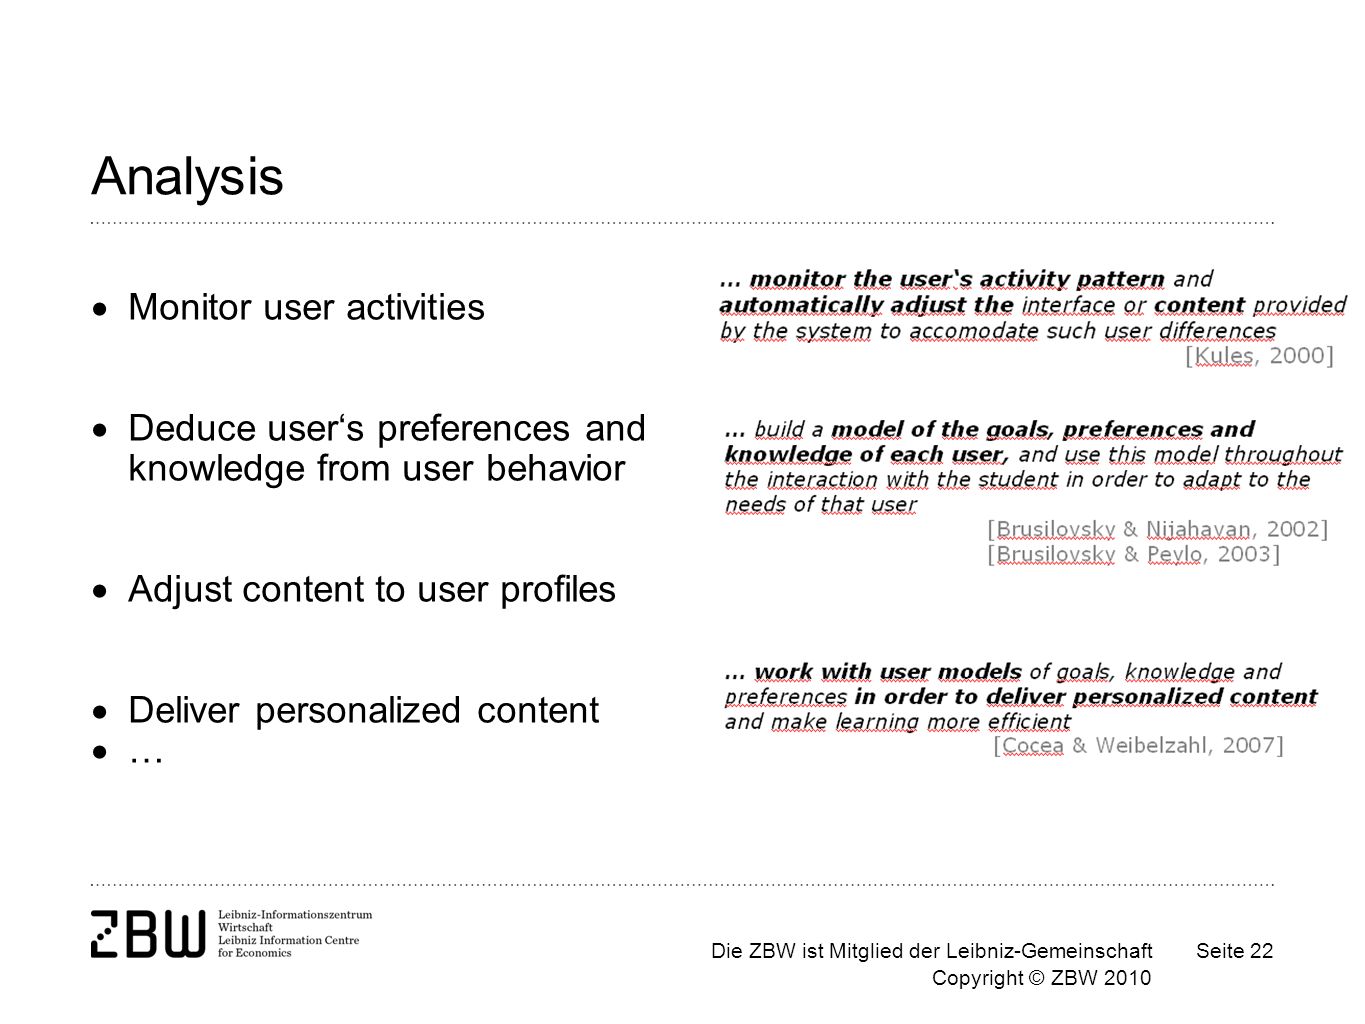 Die ZBW ist Mitglied der Leibniz-Gemeinschaft Copyright © ZBW 2010 Seite 22 Analysis Monitor user activities Deduce users preferences and knowledge from user behavior Adjust content to user profiles Deliver personalized content …